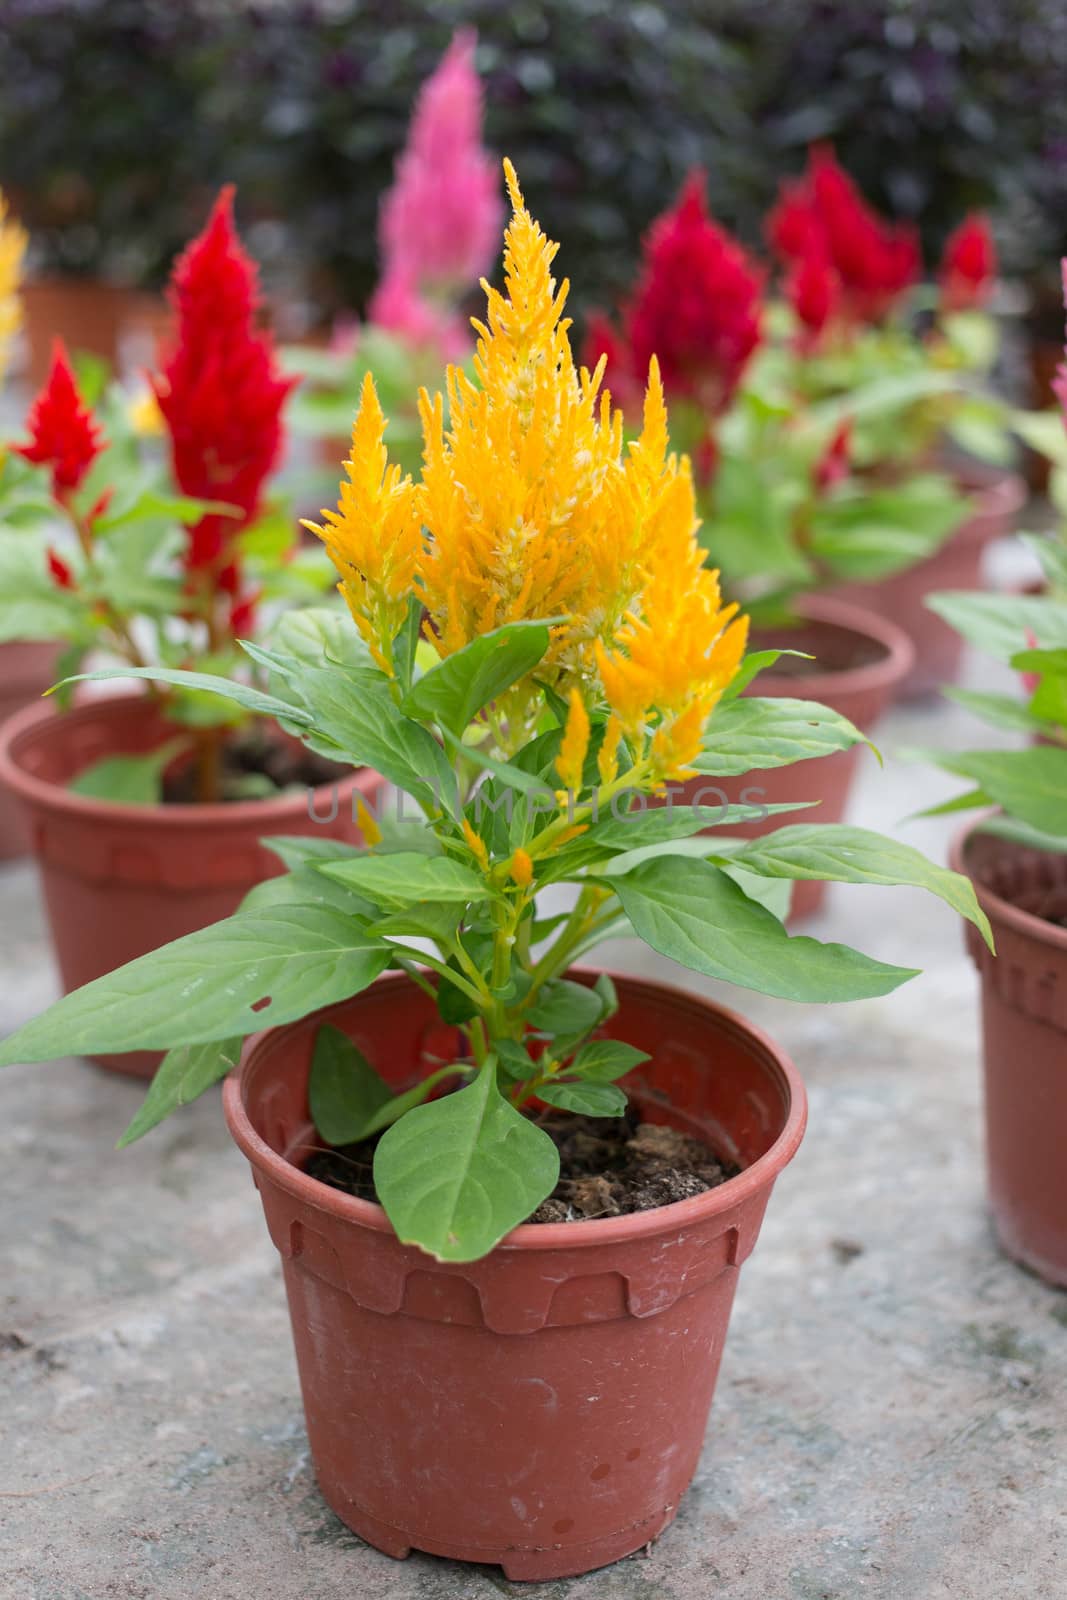 Plumed celosia, Wool flower, Red fox by ngarare